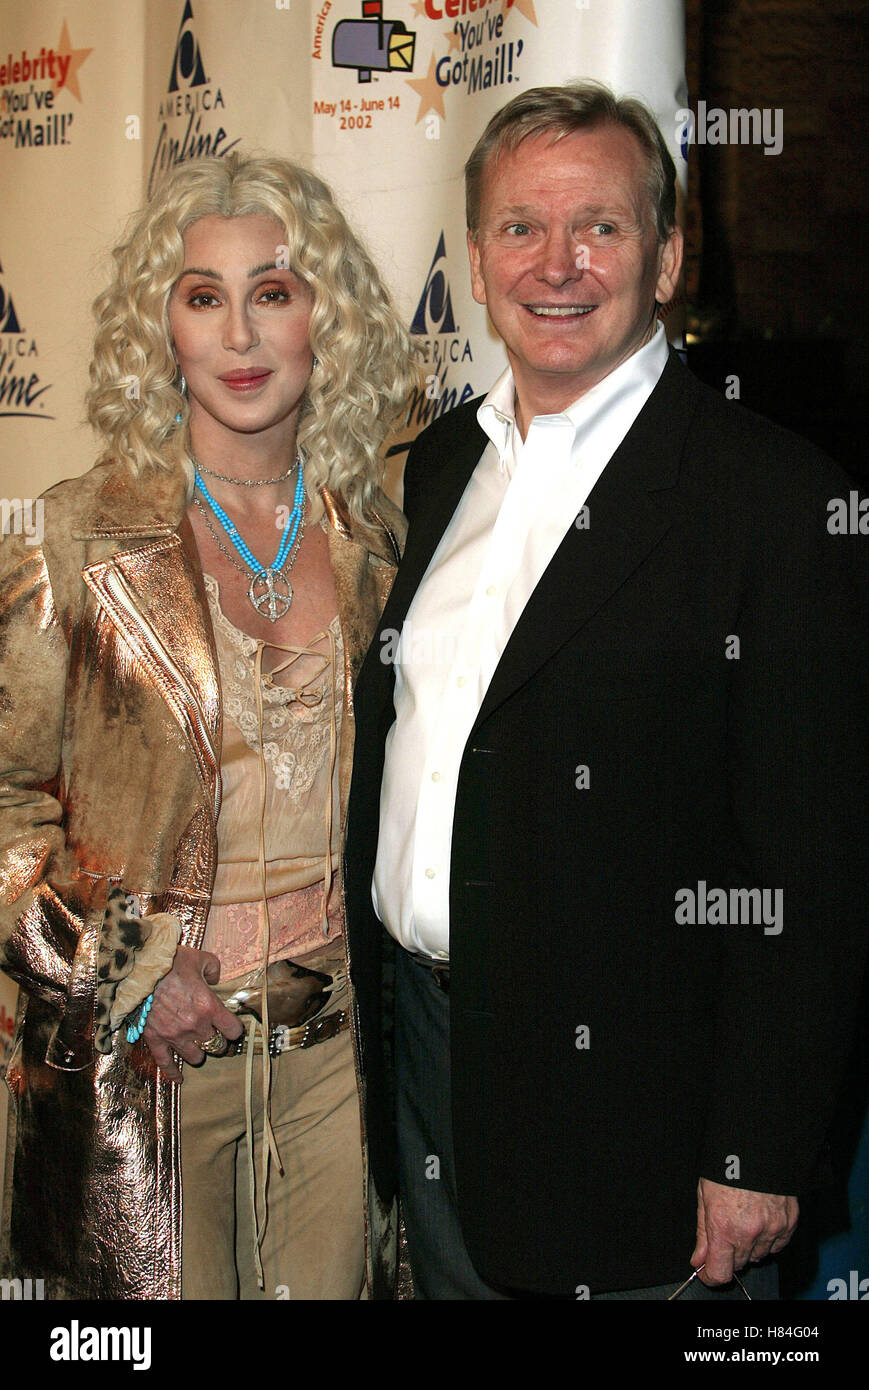 CHER & BOB MACKIE AOL 'CELEBRITY YOU'VE GOT MAIL THE HIGHLANDS HOLLYWOOD HOLLYWOOD LOS ANGELES USA 14 May 2002 Stock Photo